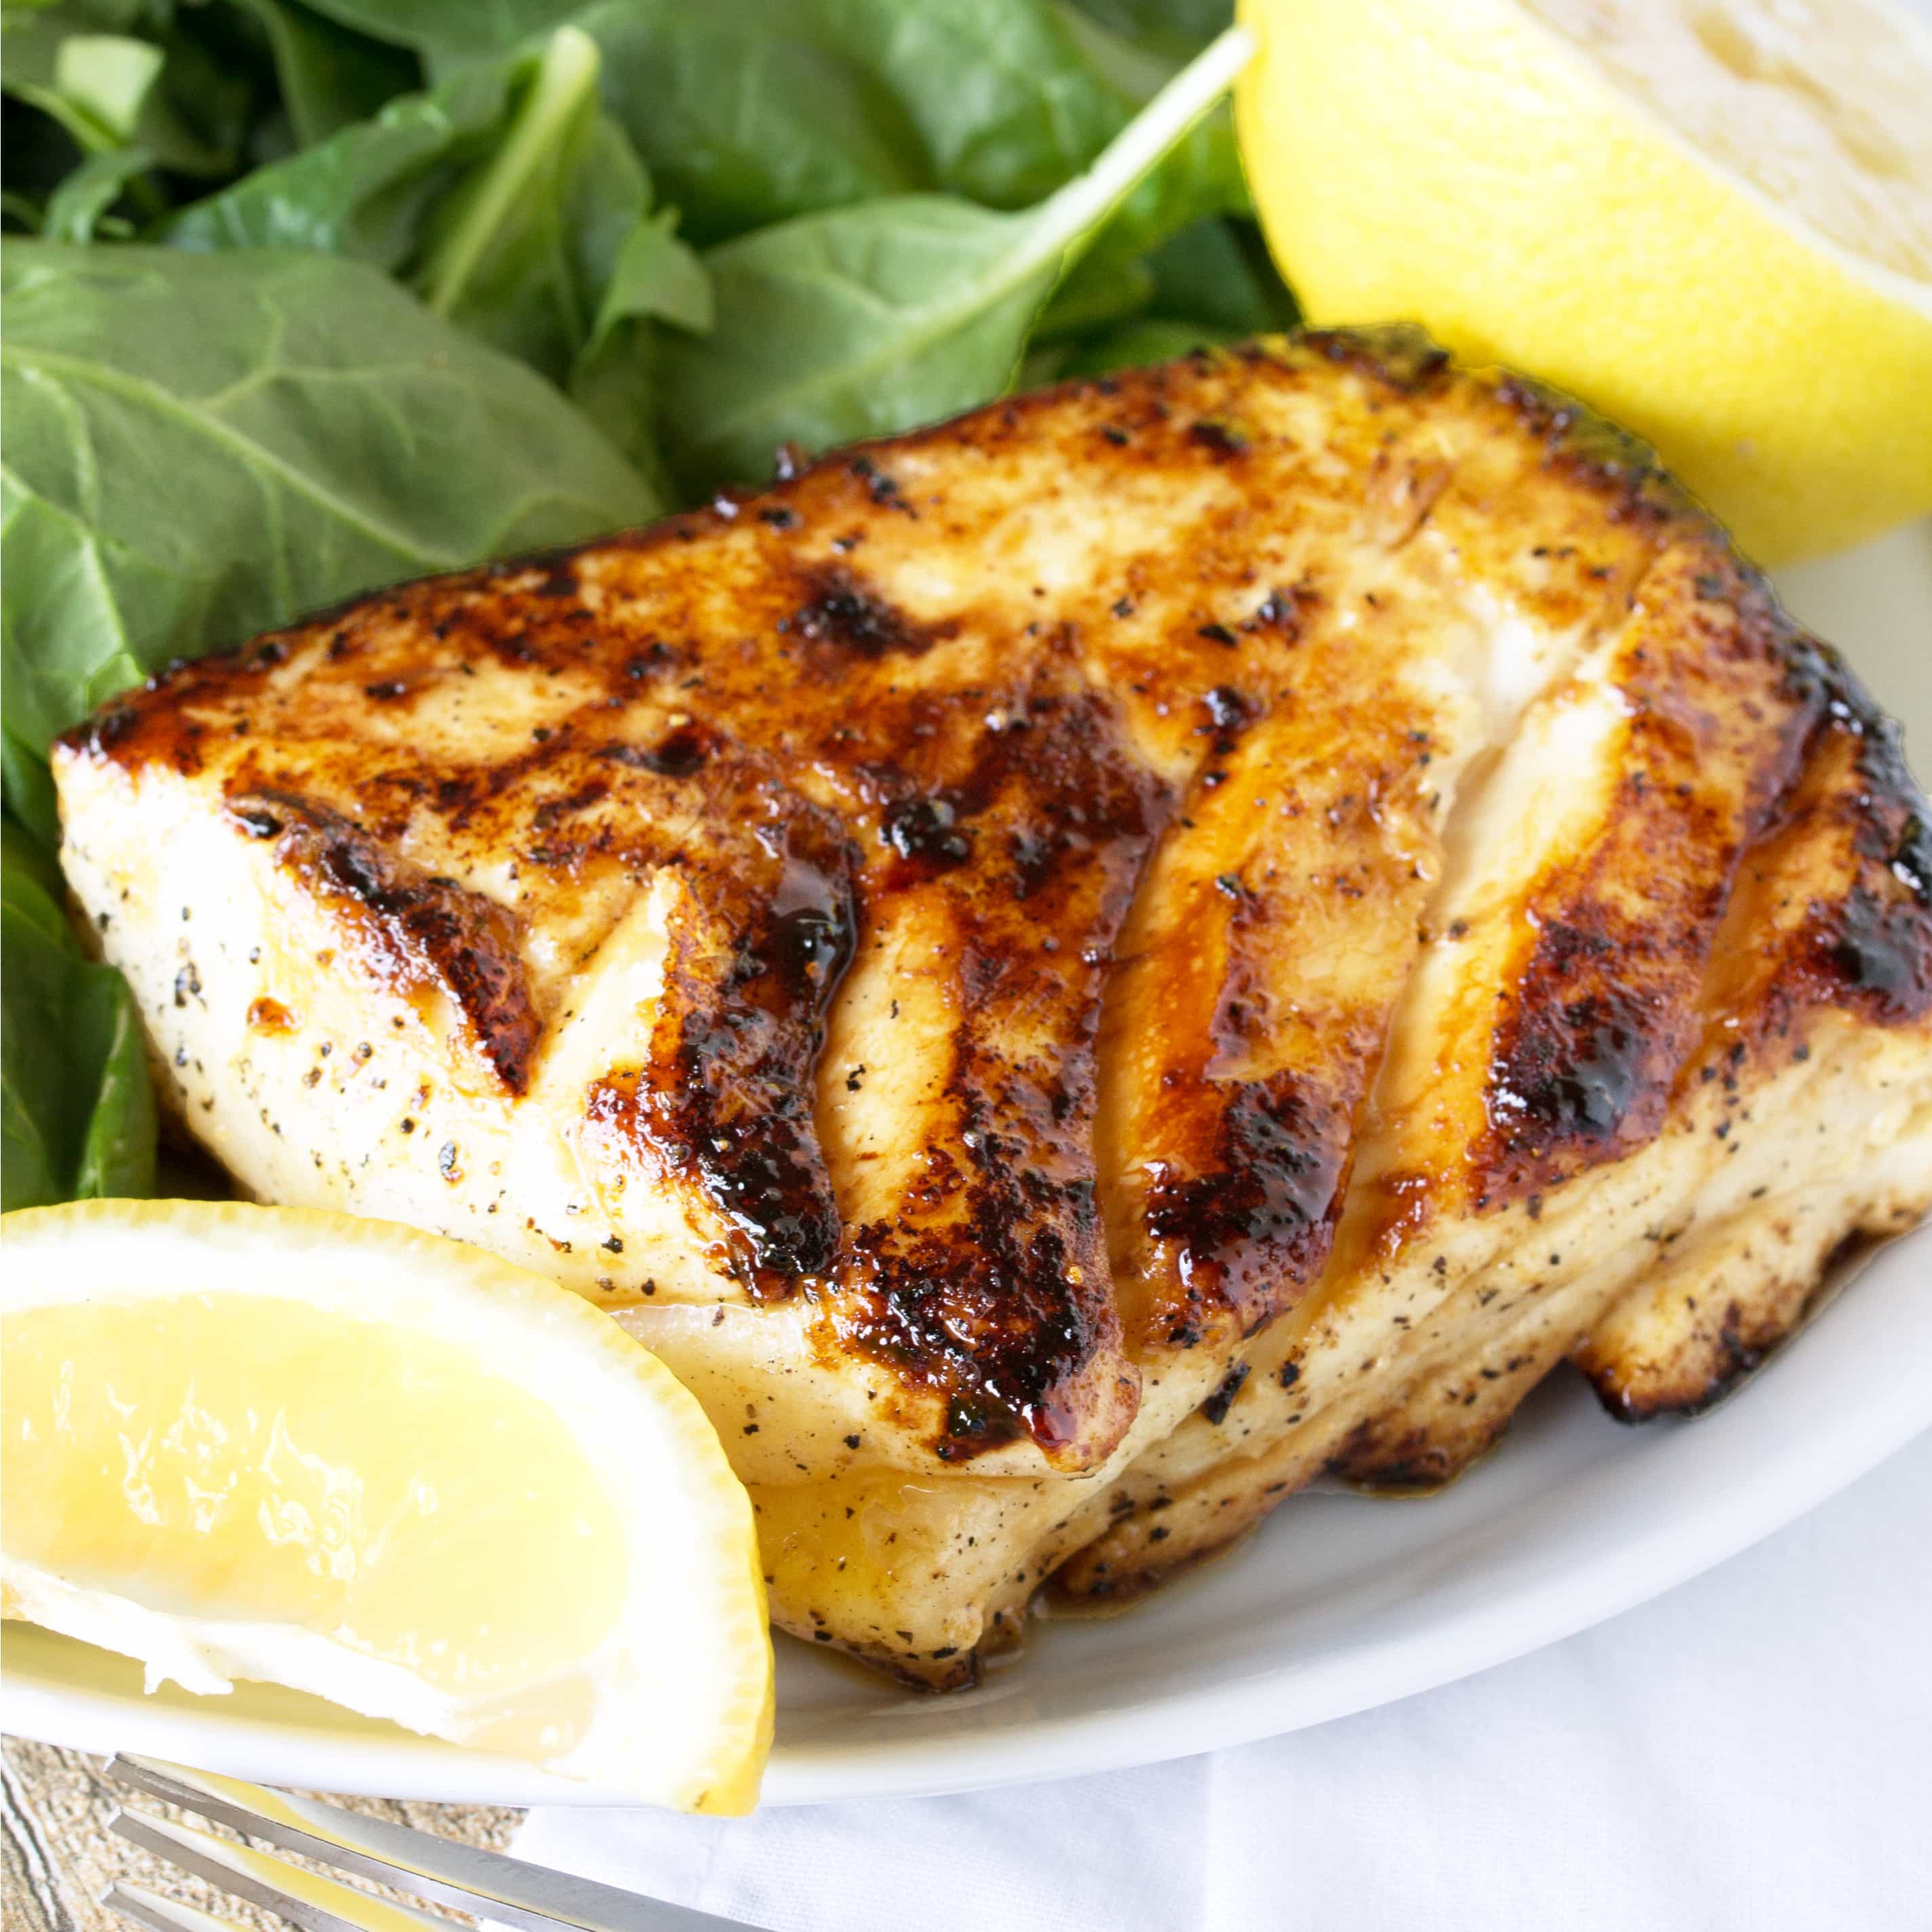 Grilled halibut with a salad and lemon wedges on a white plate with a fork nearby